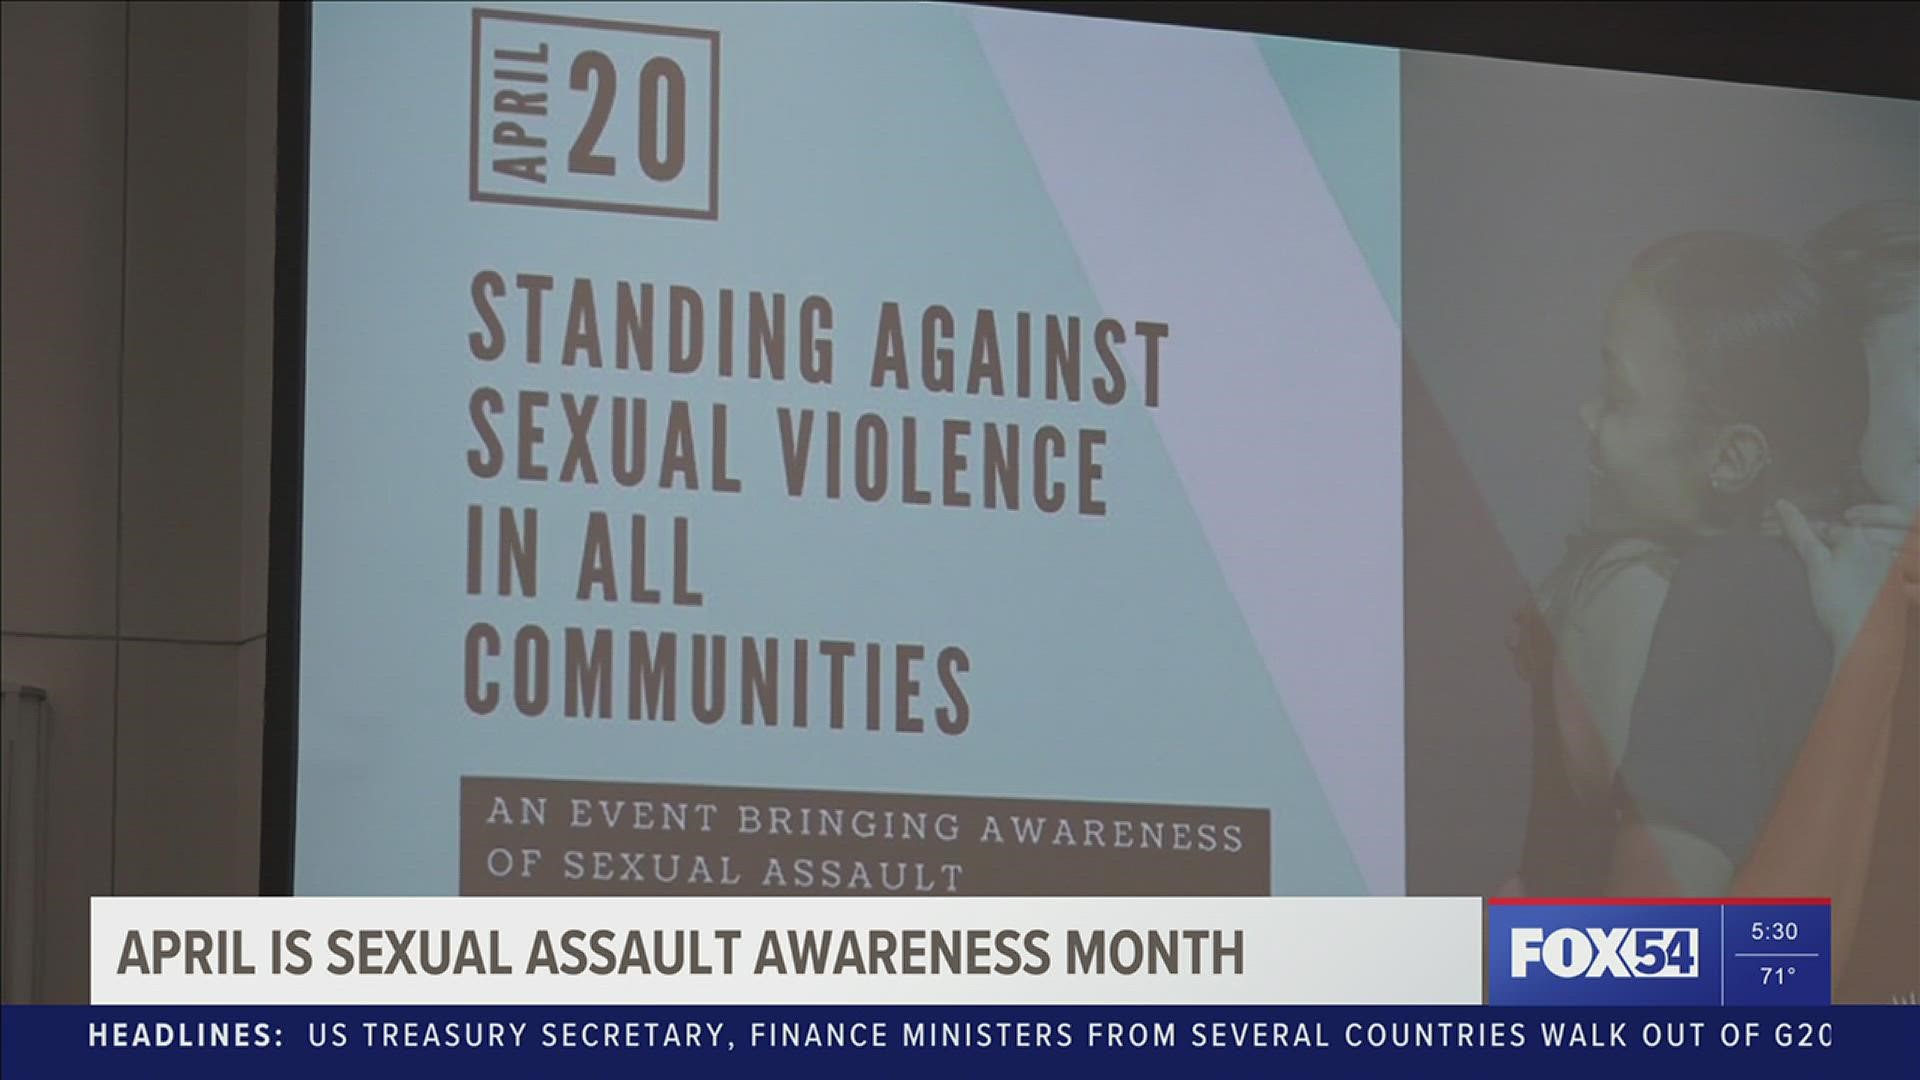 Even in ways outside of this event - Ashakiran is having an impact on the Tennessee Valley. They want you to know that sexual assault is more common than you think.